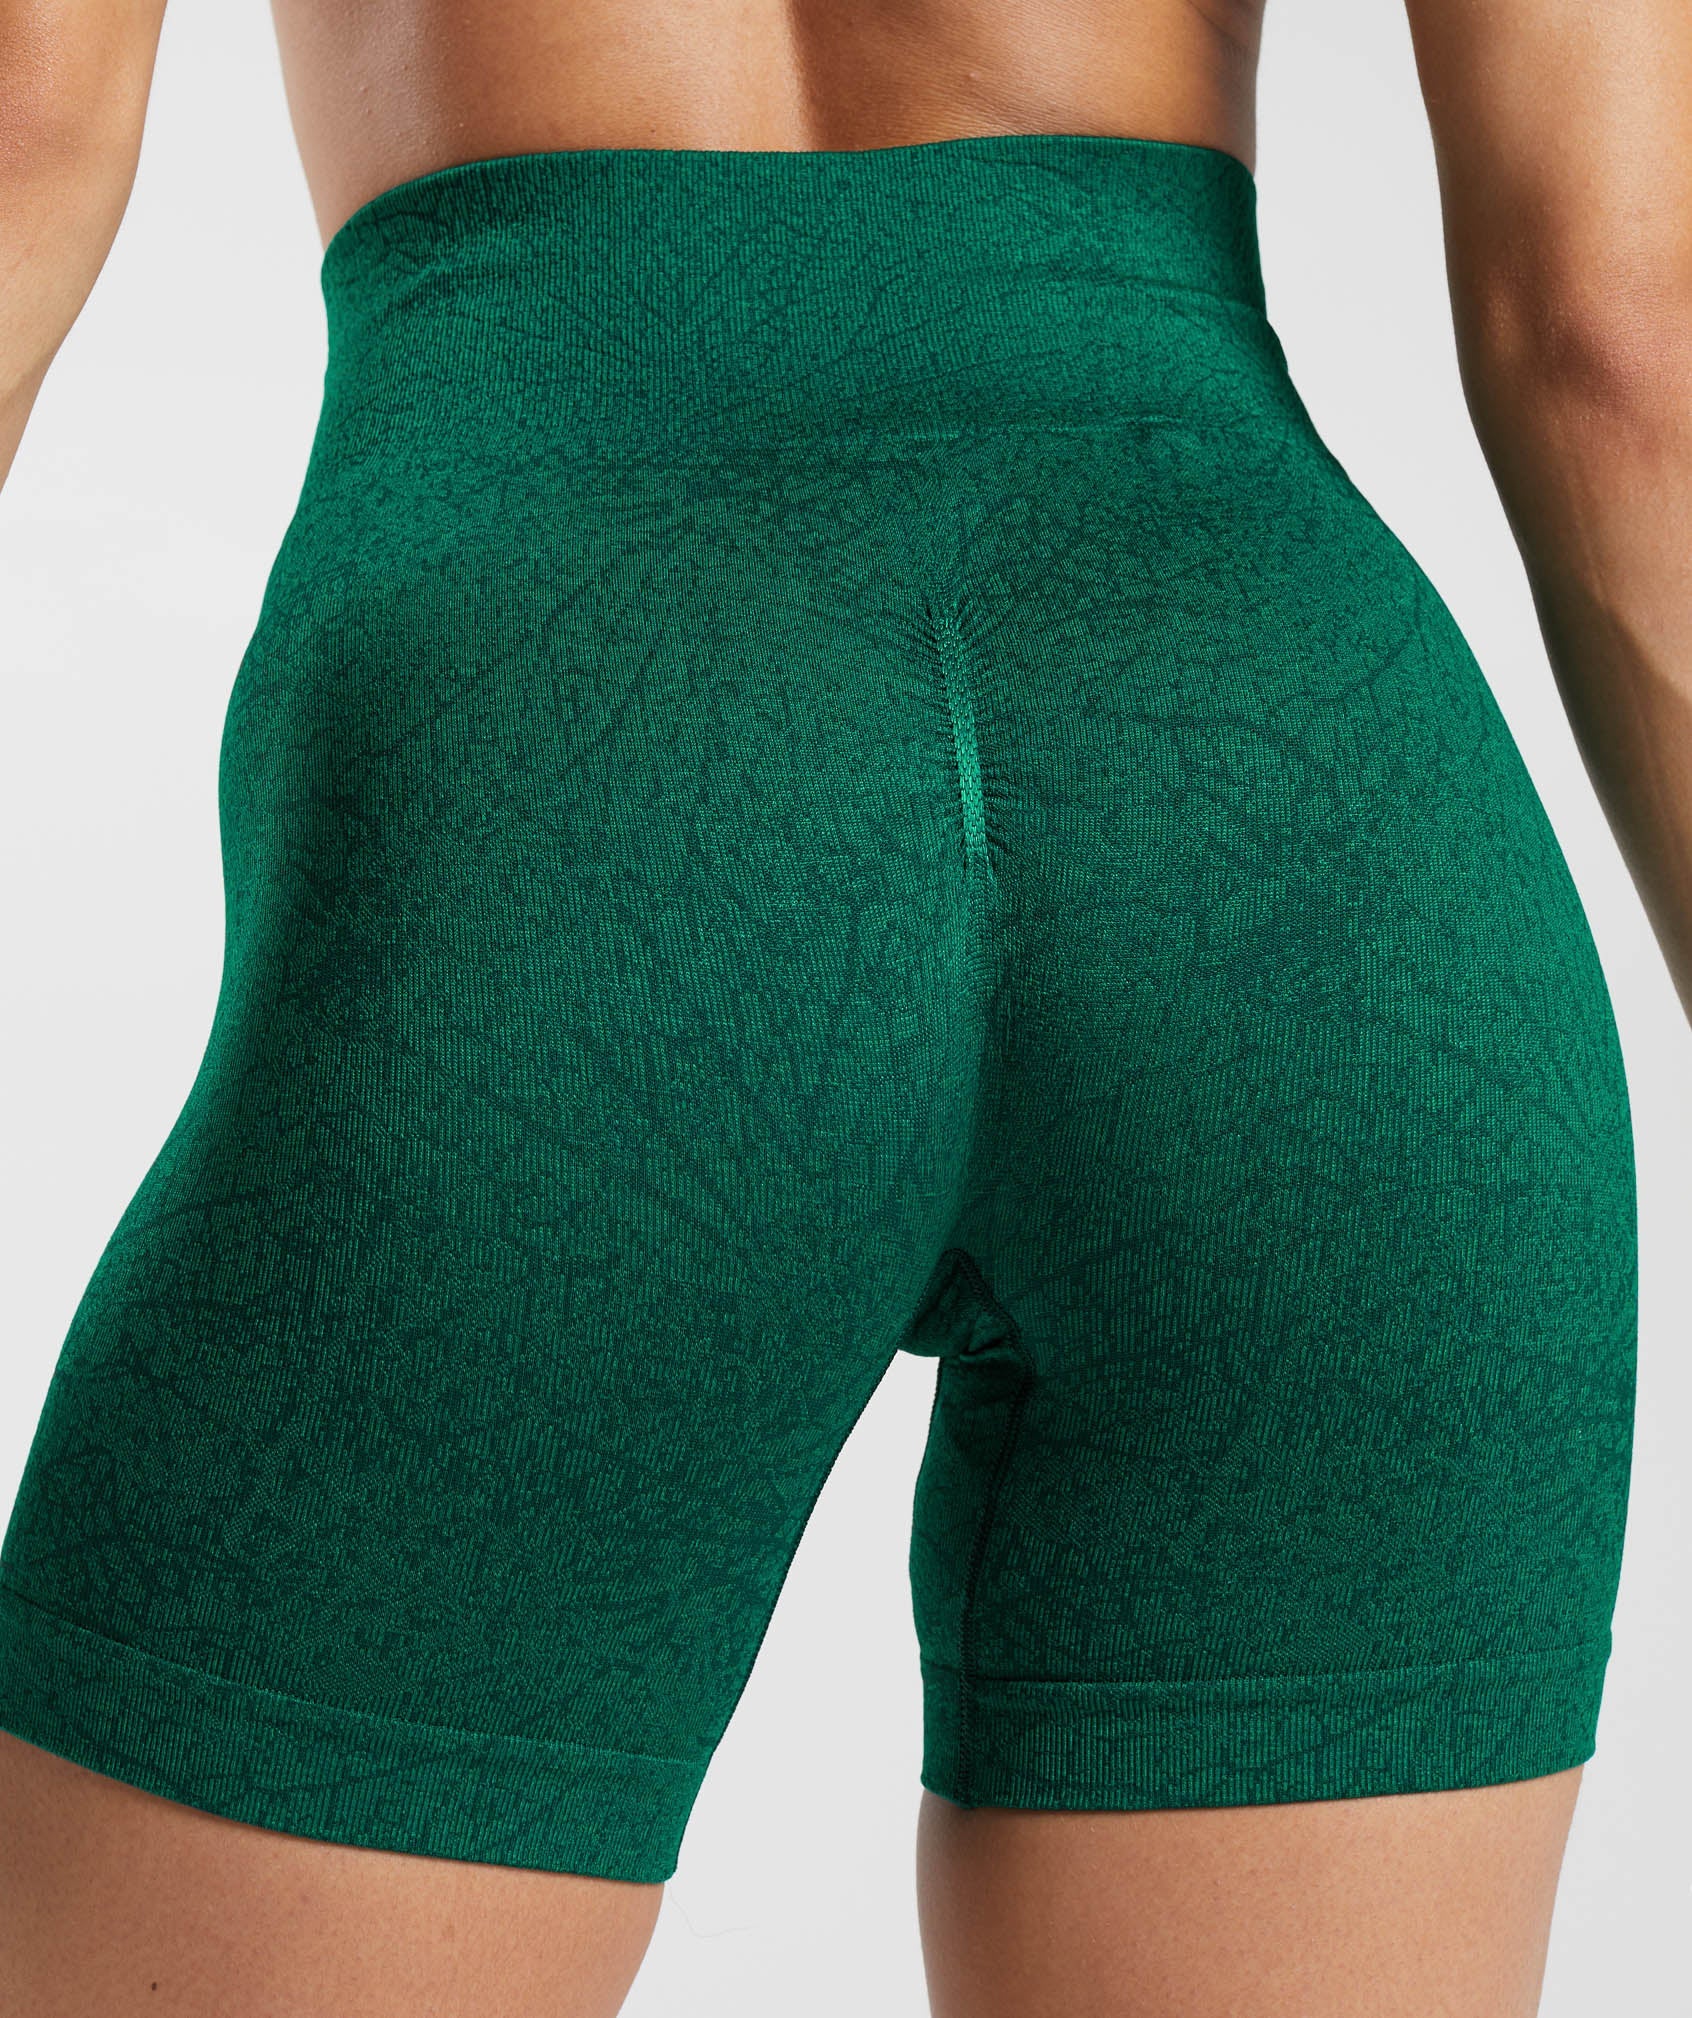 Adapt Pattern Seamless Shorts in Forest Green/Rich Green - view 6